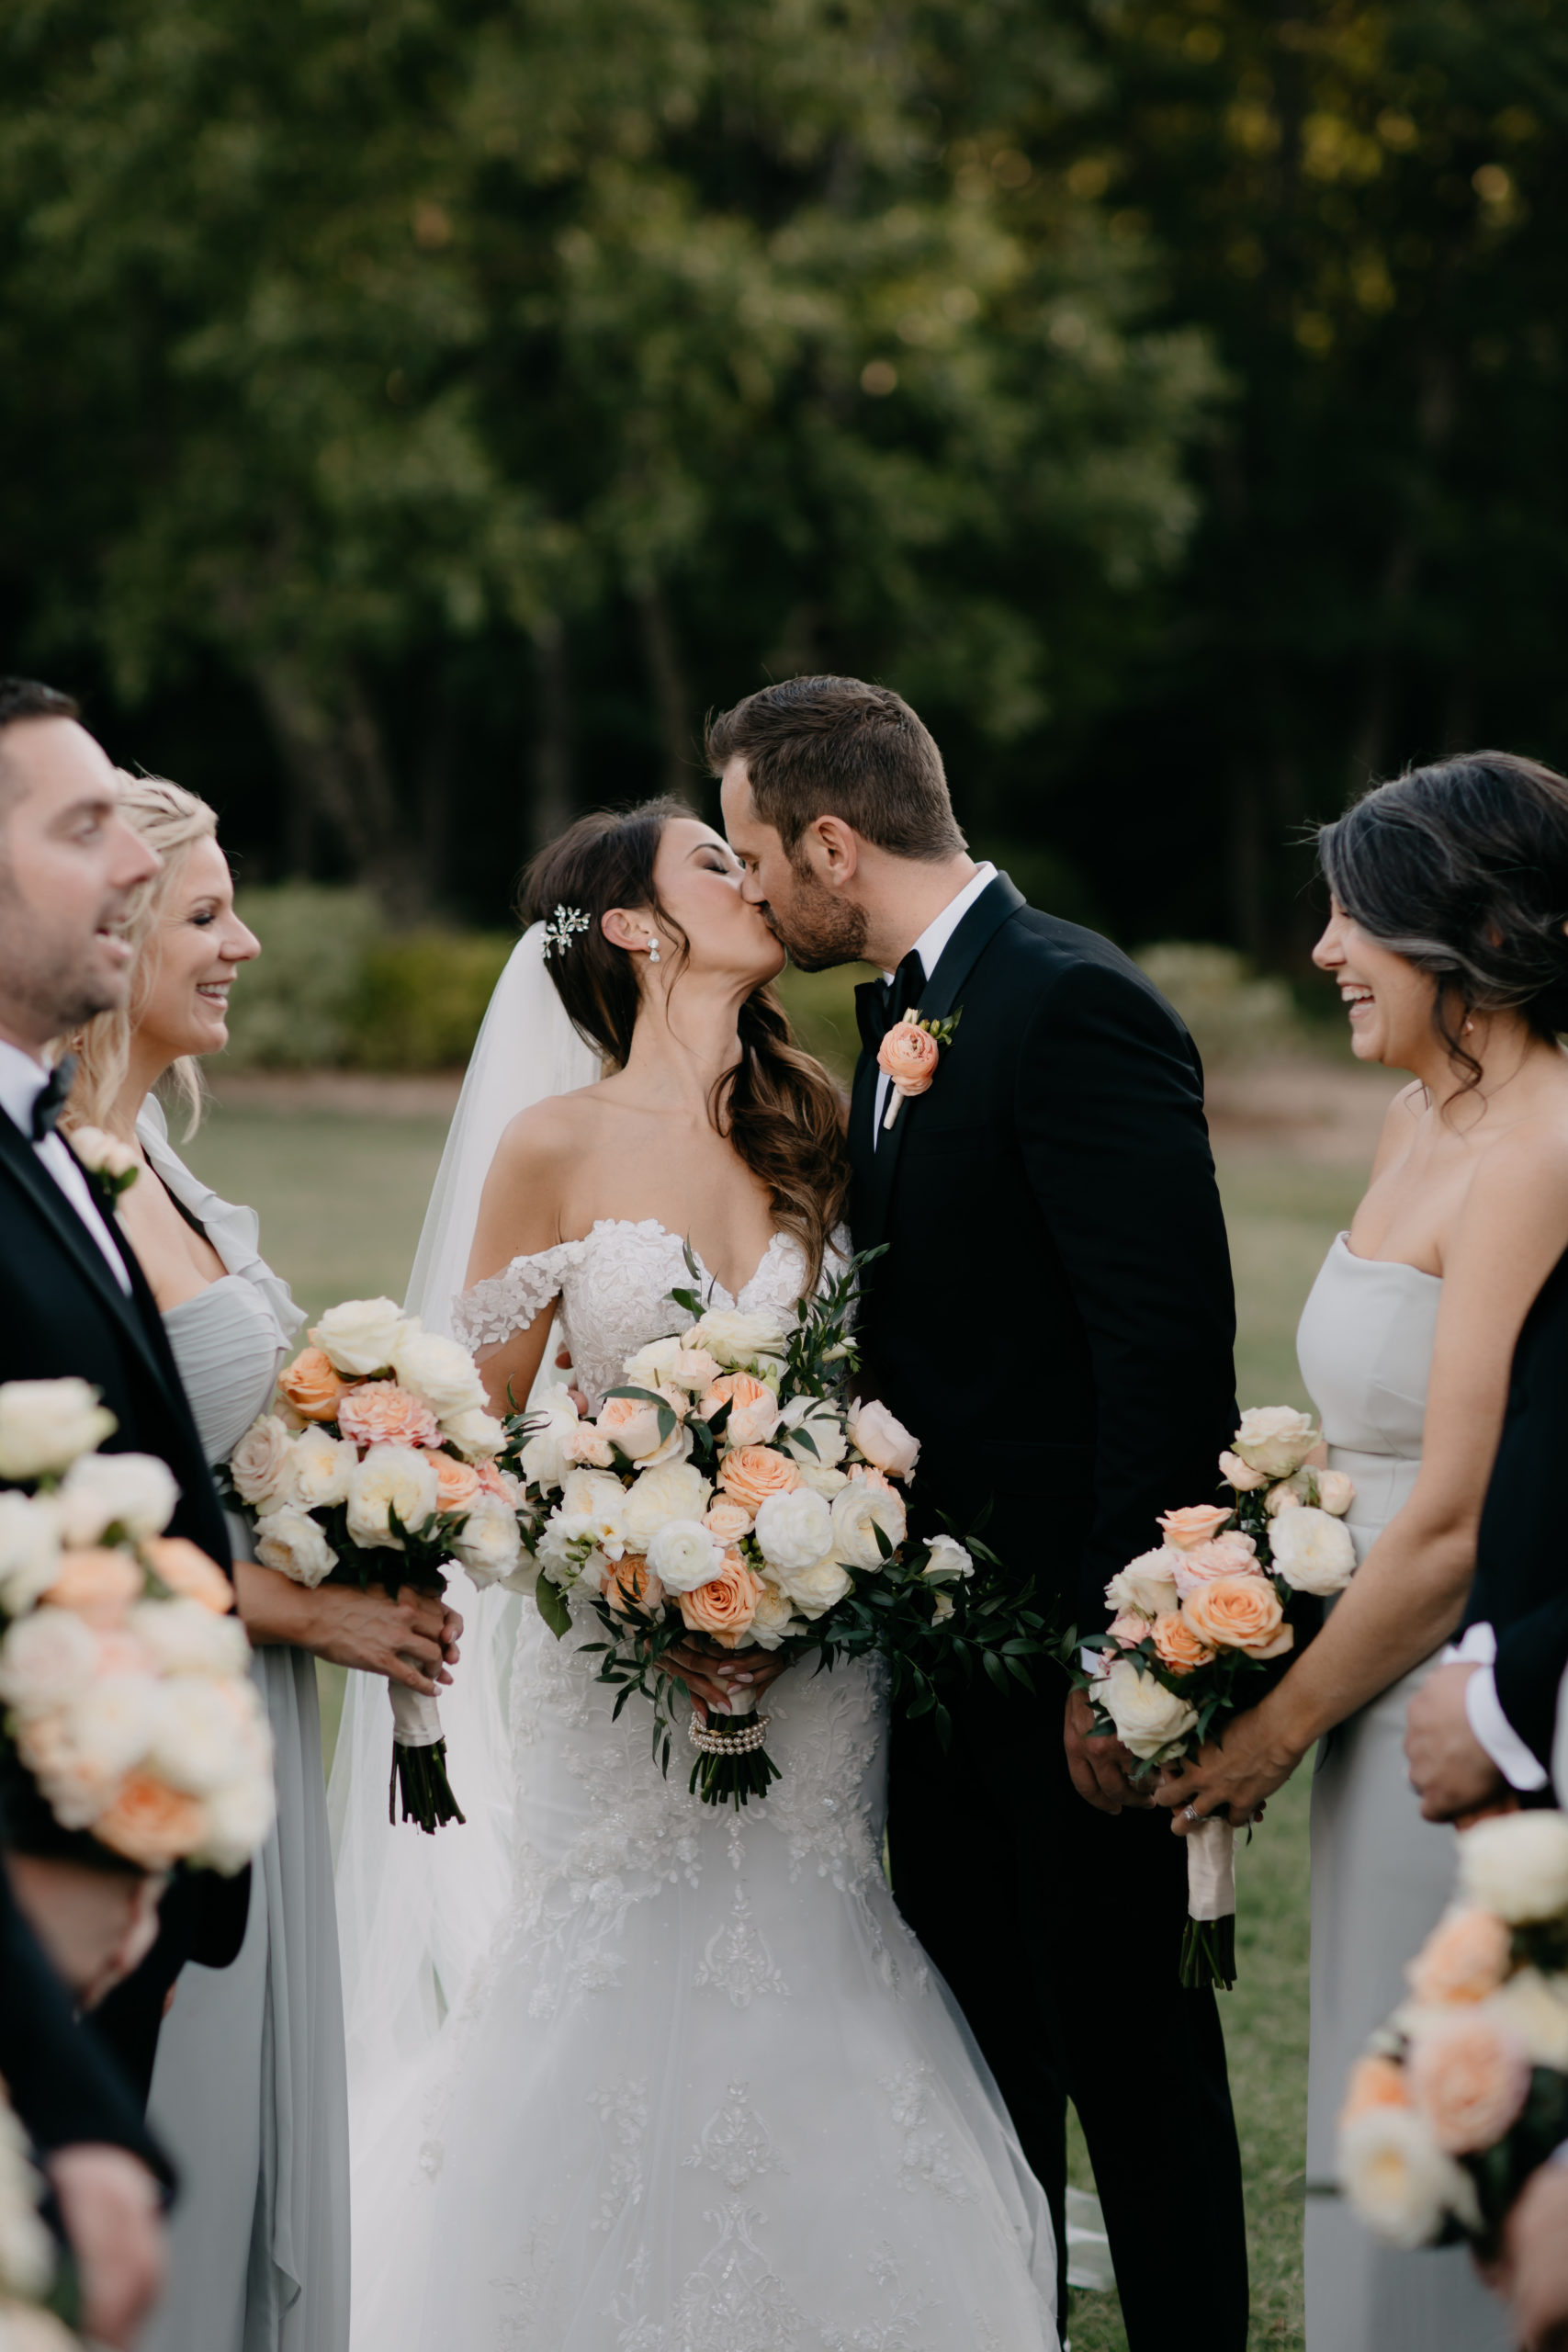 A bride and groom kissing in front of their wedding party.